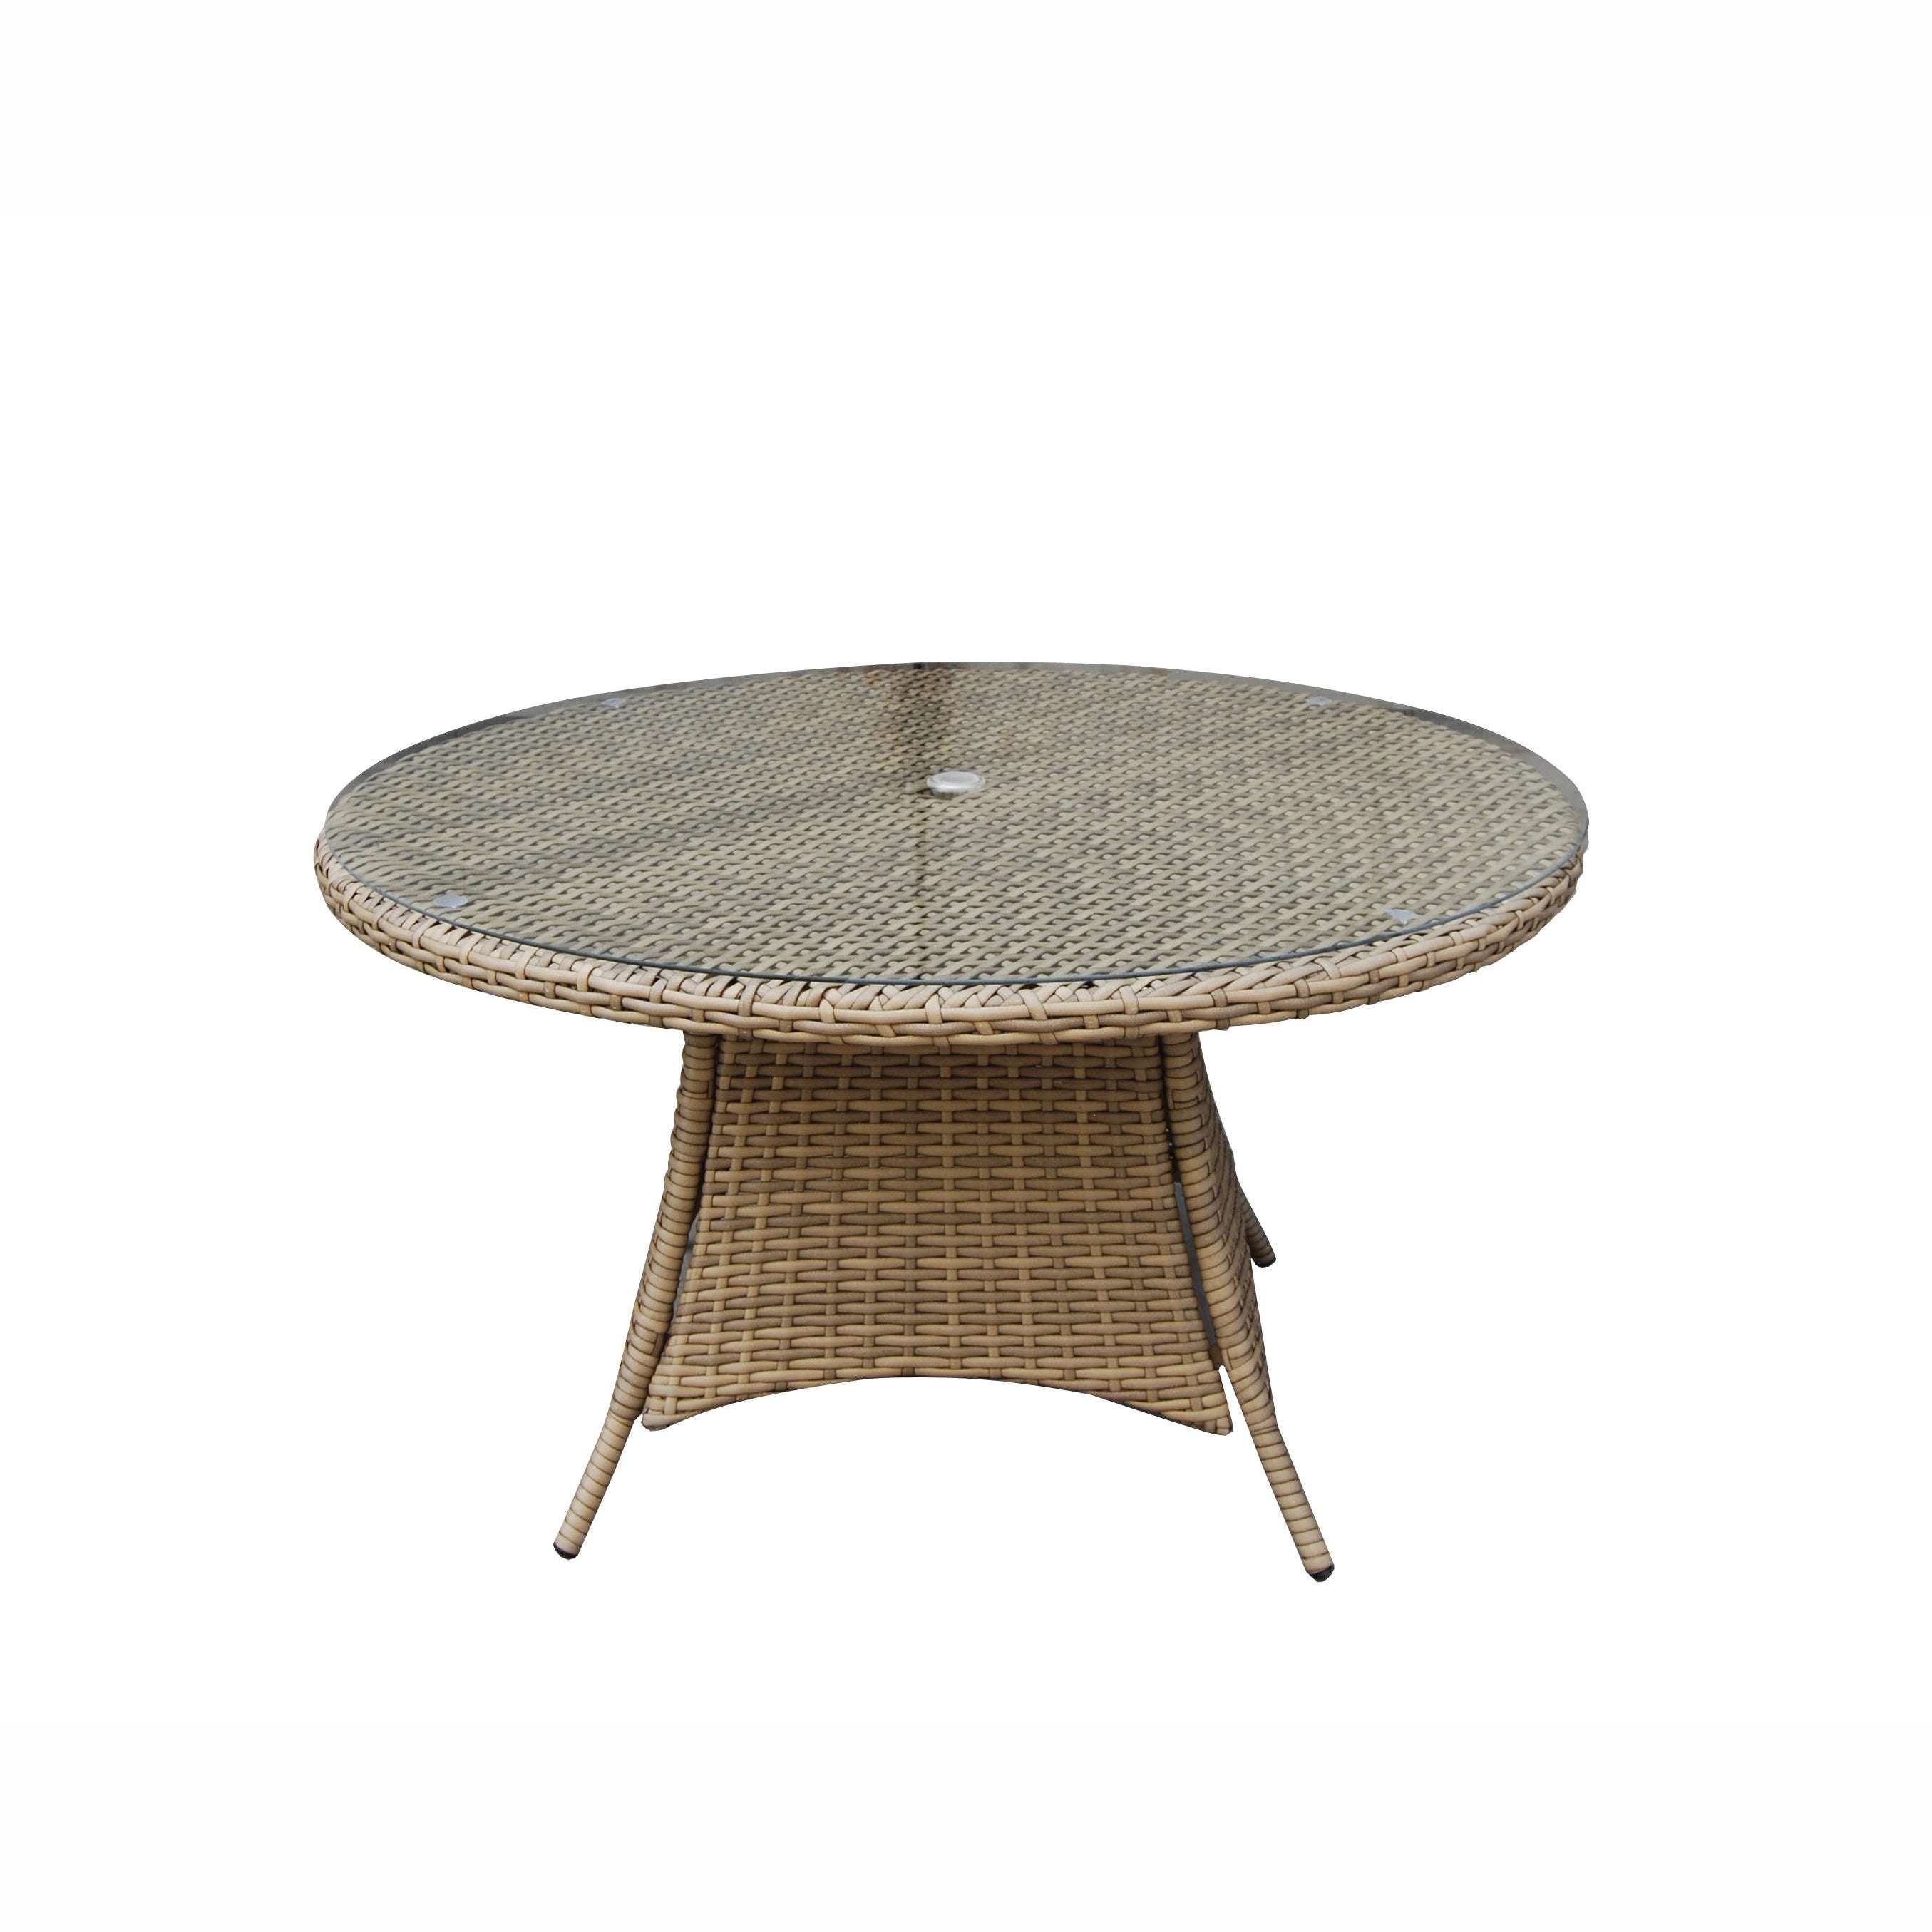 Exceptional Garden:Signature Weave Darcey 4-Seater Dining Set with Round Table and Stacking Chairs